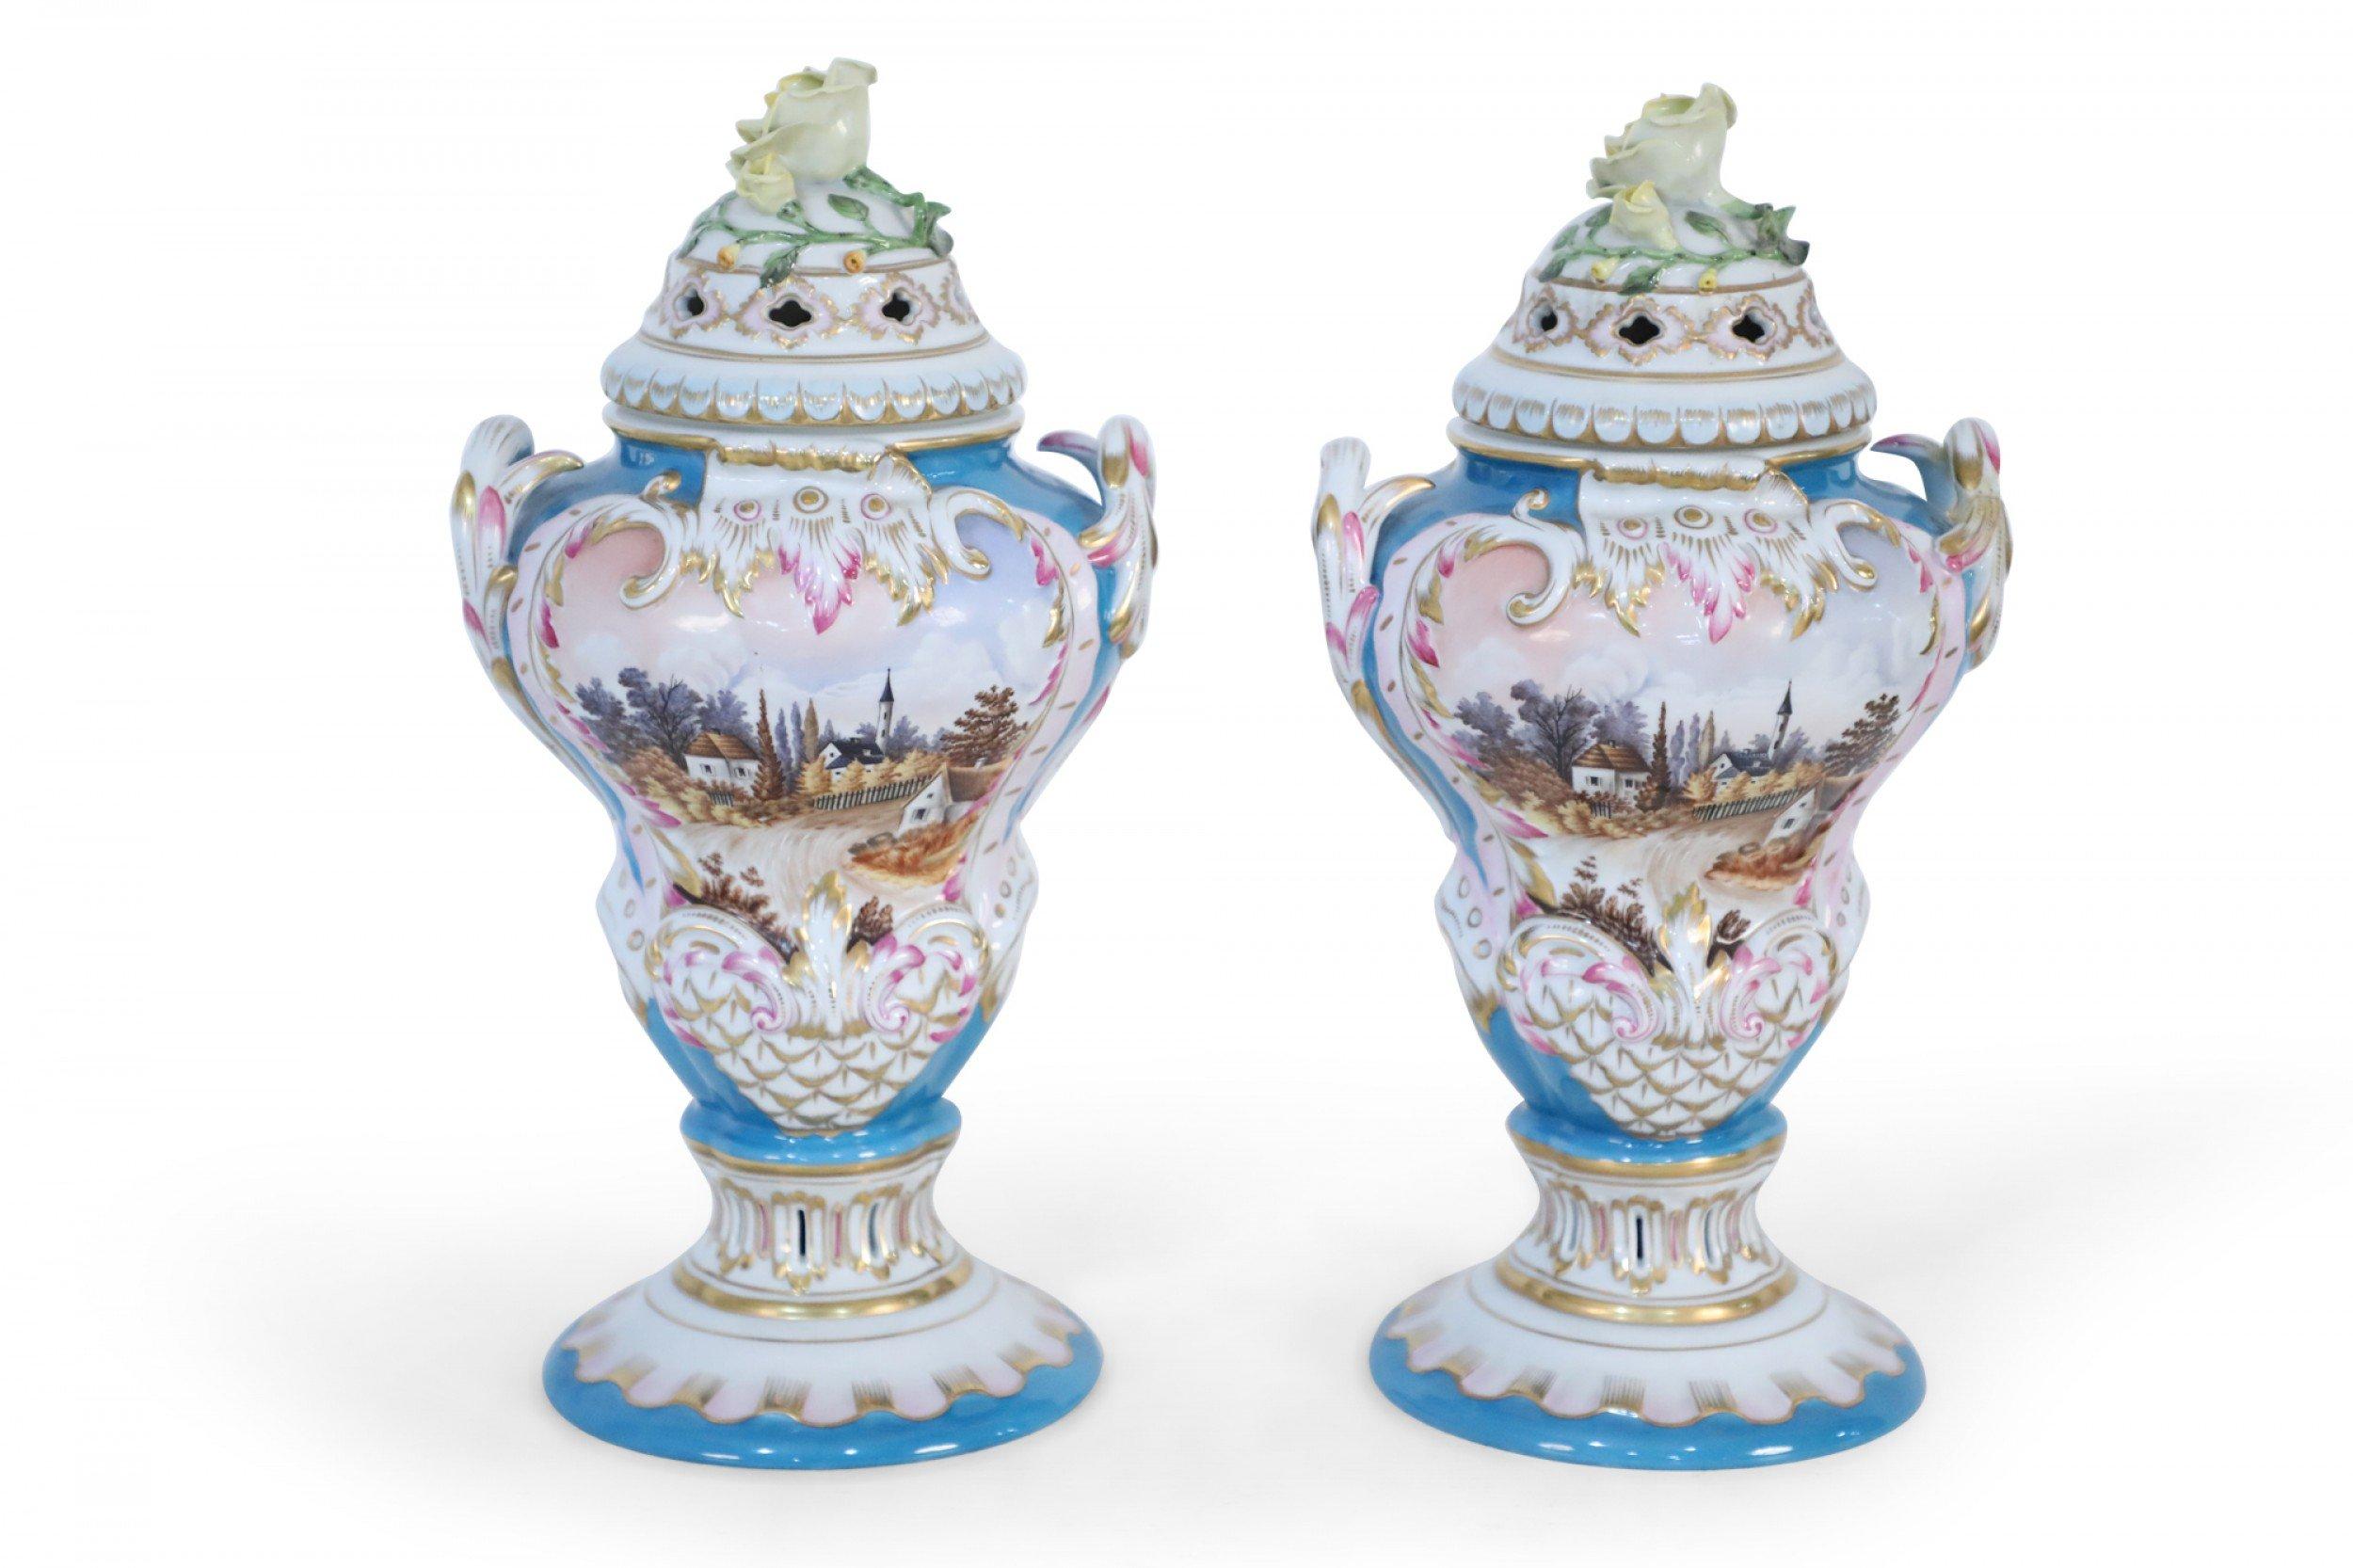 Pair of Hungarian 20th century porcelain urns with bright blue backgrounds and painted central pastoral scenes with gilt and pink details and lids with decorative cutouts topped with yellow porcelain roses (Marked, HEREND HUNGARY).